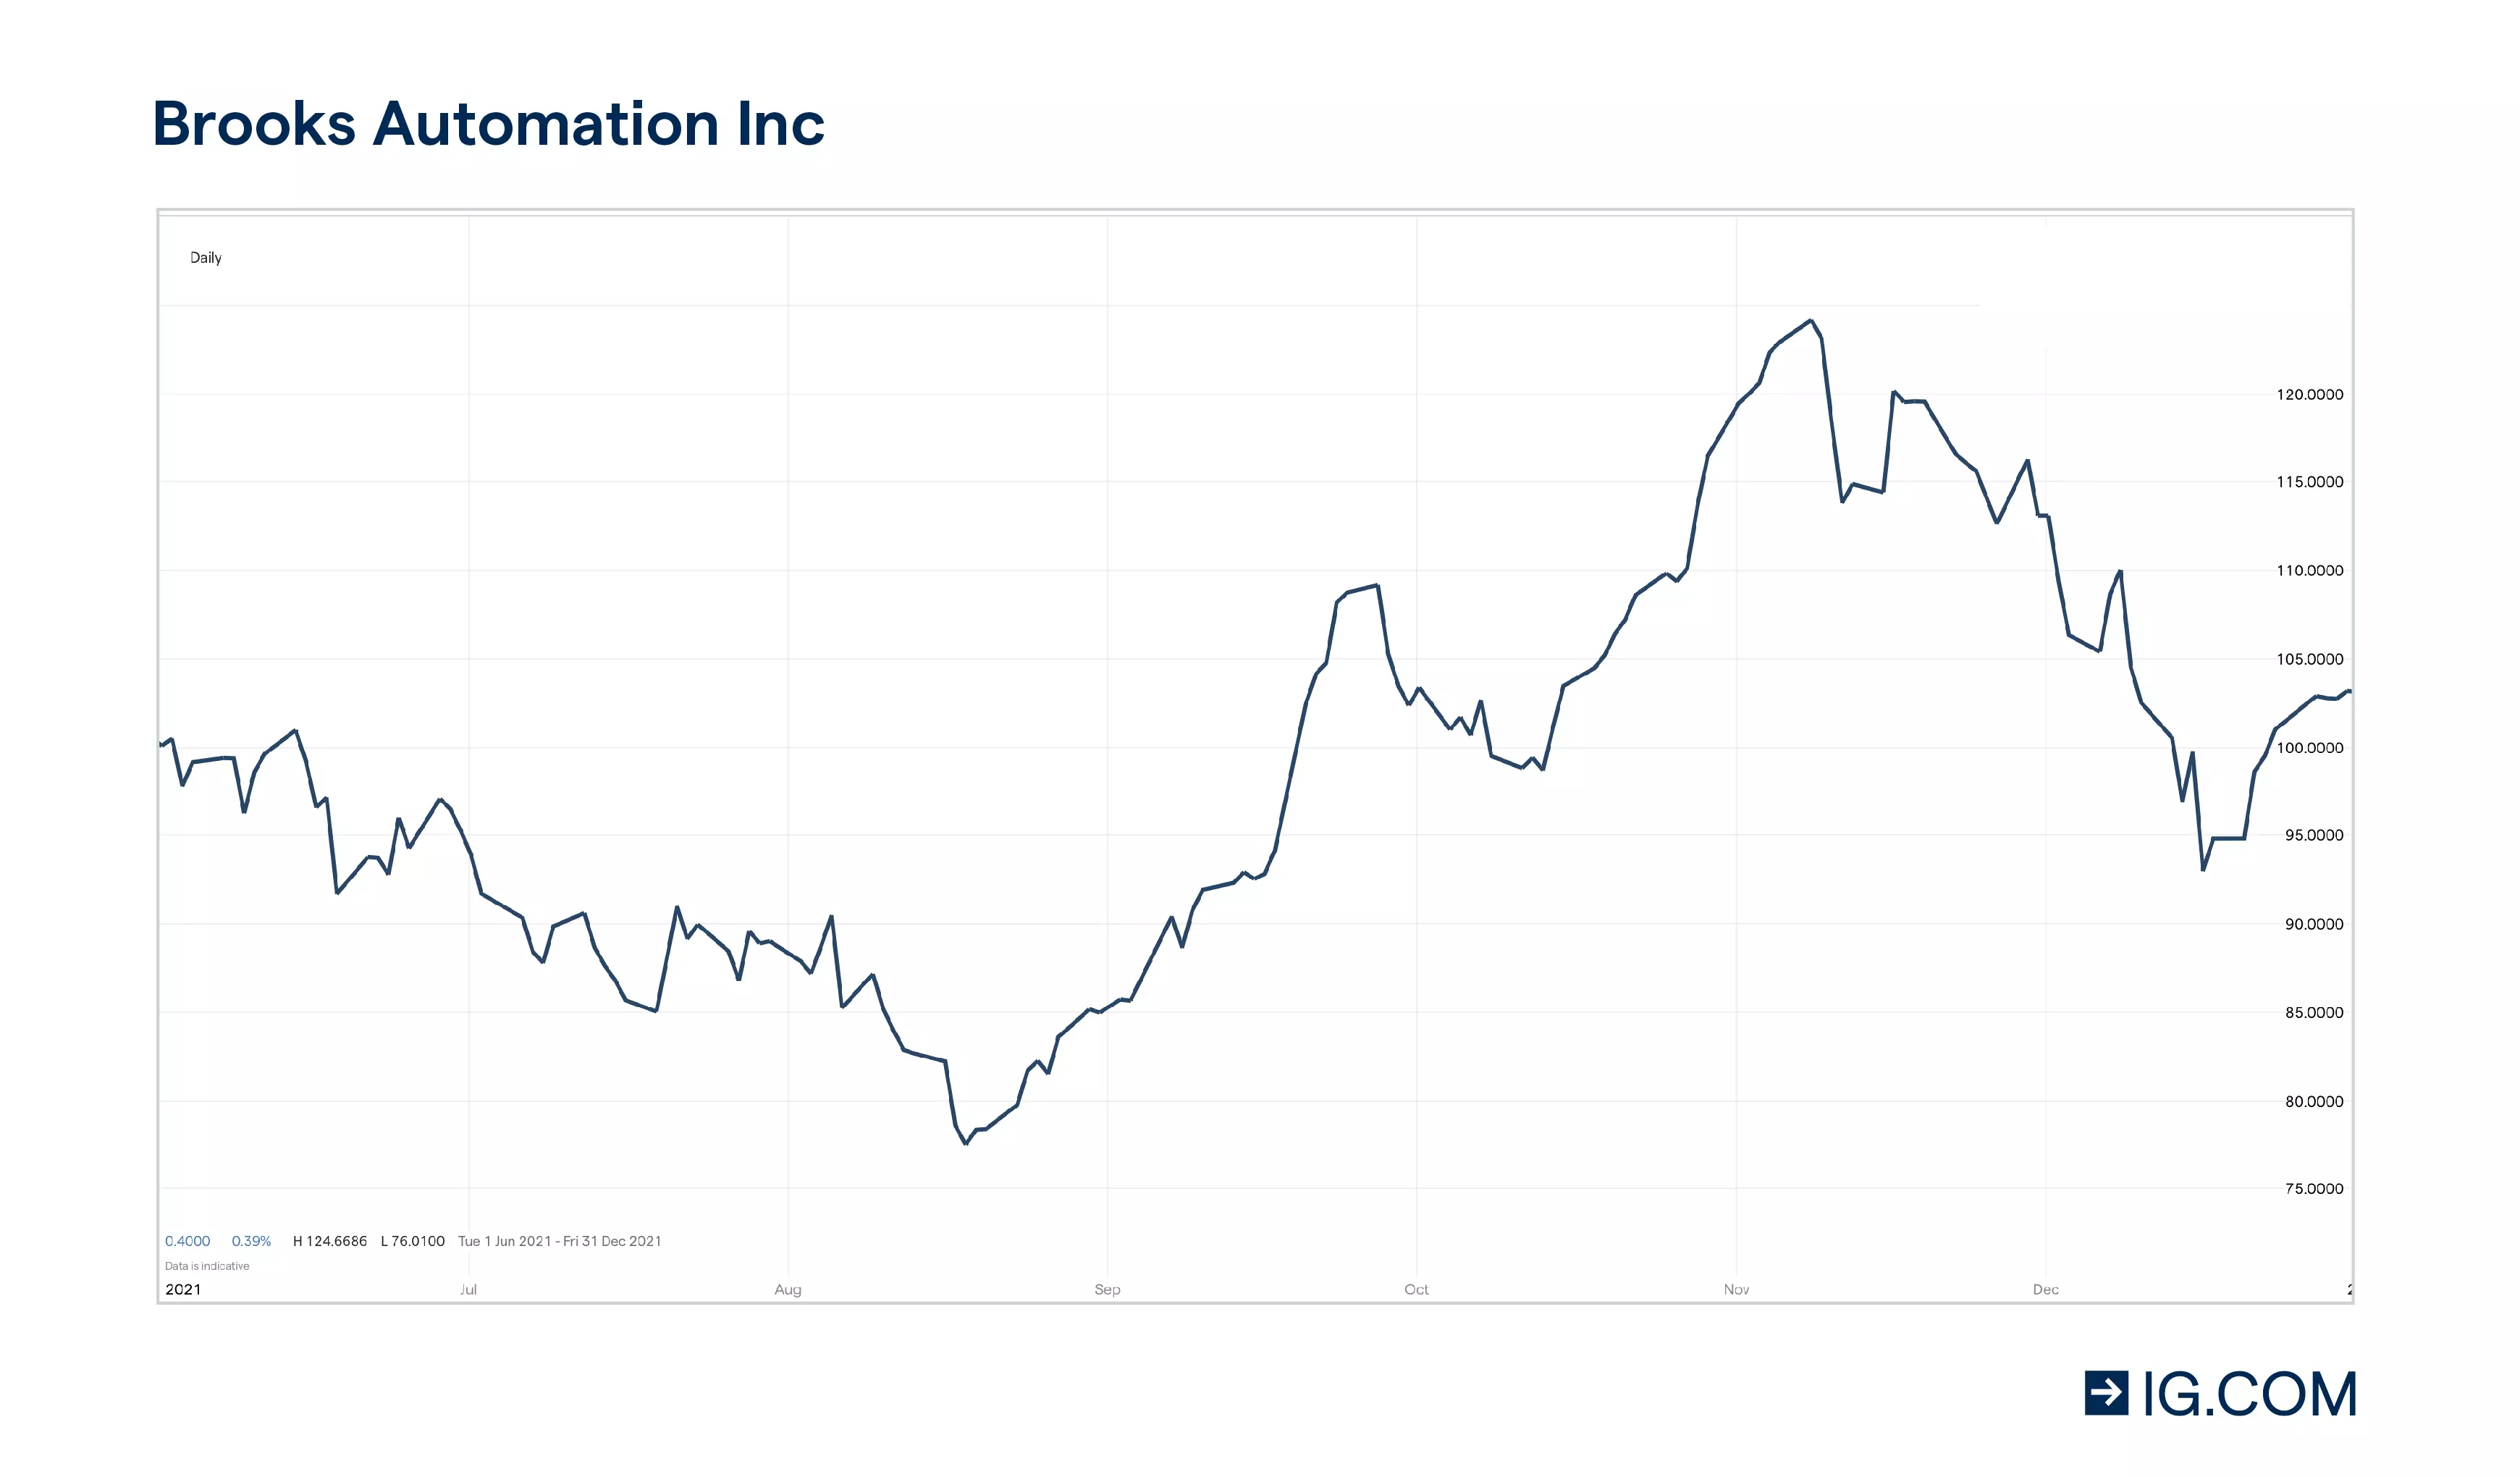 Chart of Brooks Automation share prices over the period of 2021